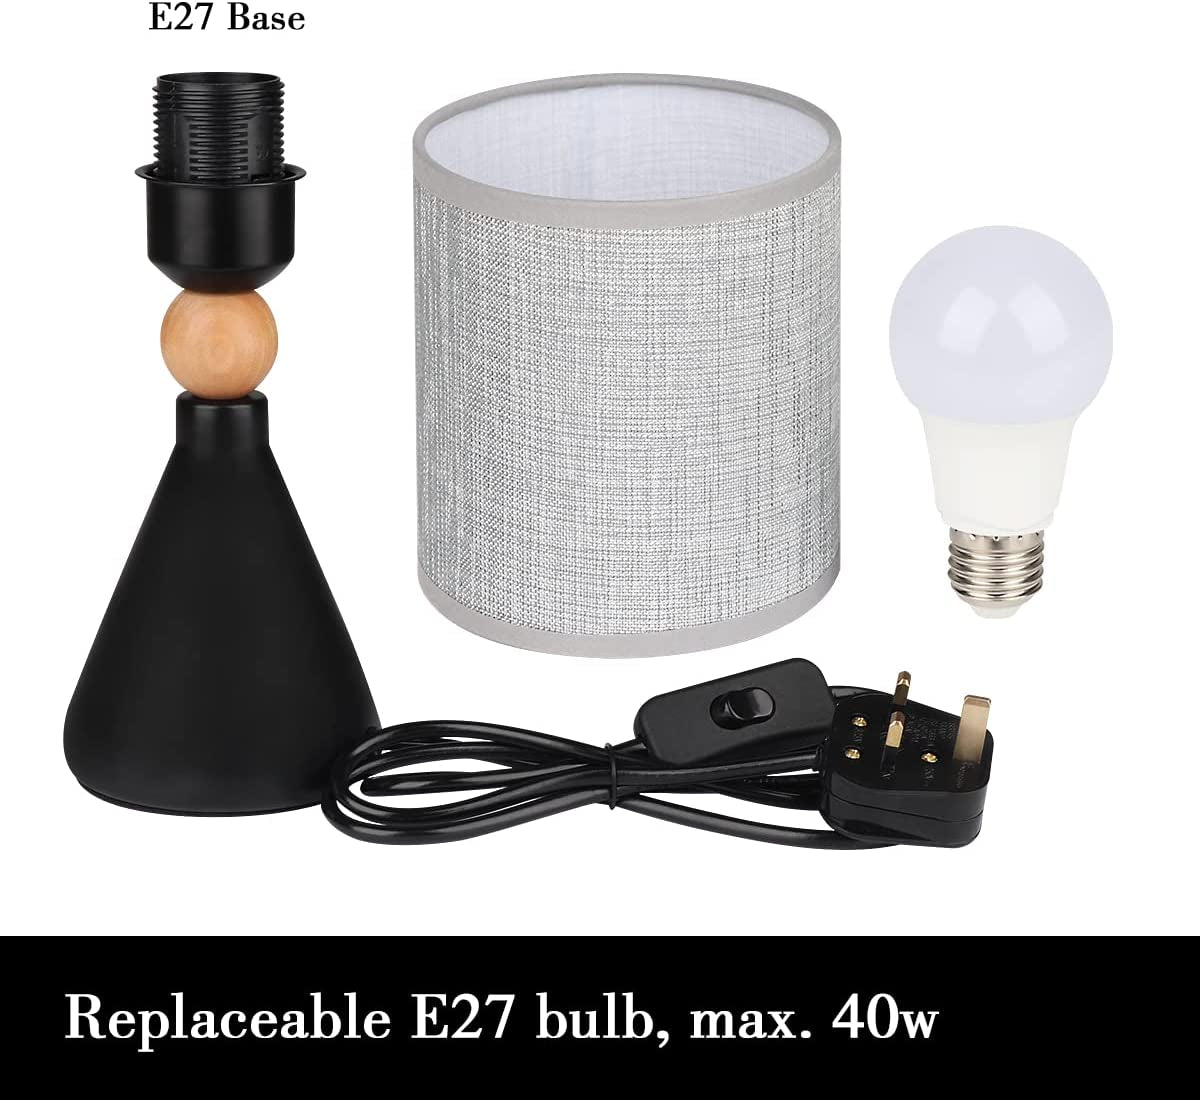 ZEDYOE Dimmable Table Lamp LED Warm White Bedside Lamp,With Gray Fabric Lampshade,E27 Base,For Reading,Bedroom,Living Room,Study,Office(7W Bulb Included)